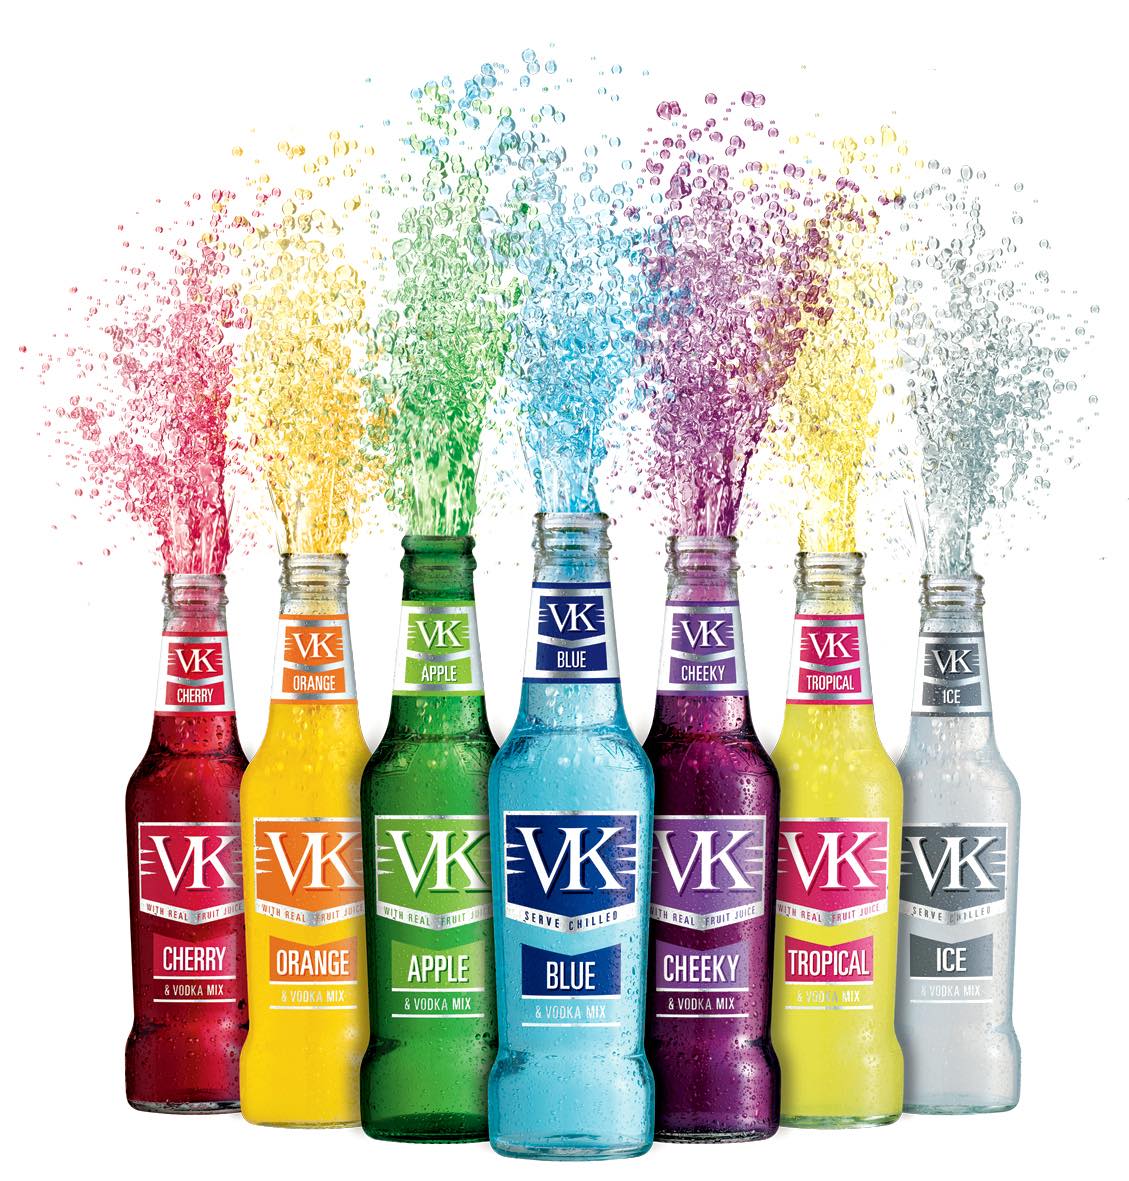 Global Brands triples VK sales with UK tour